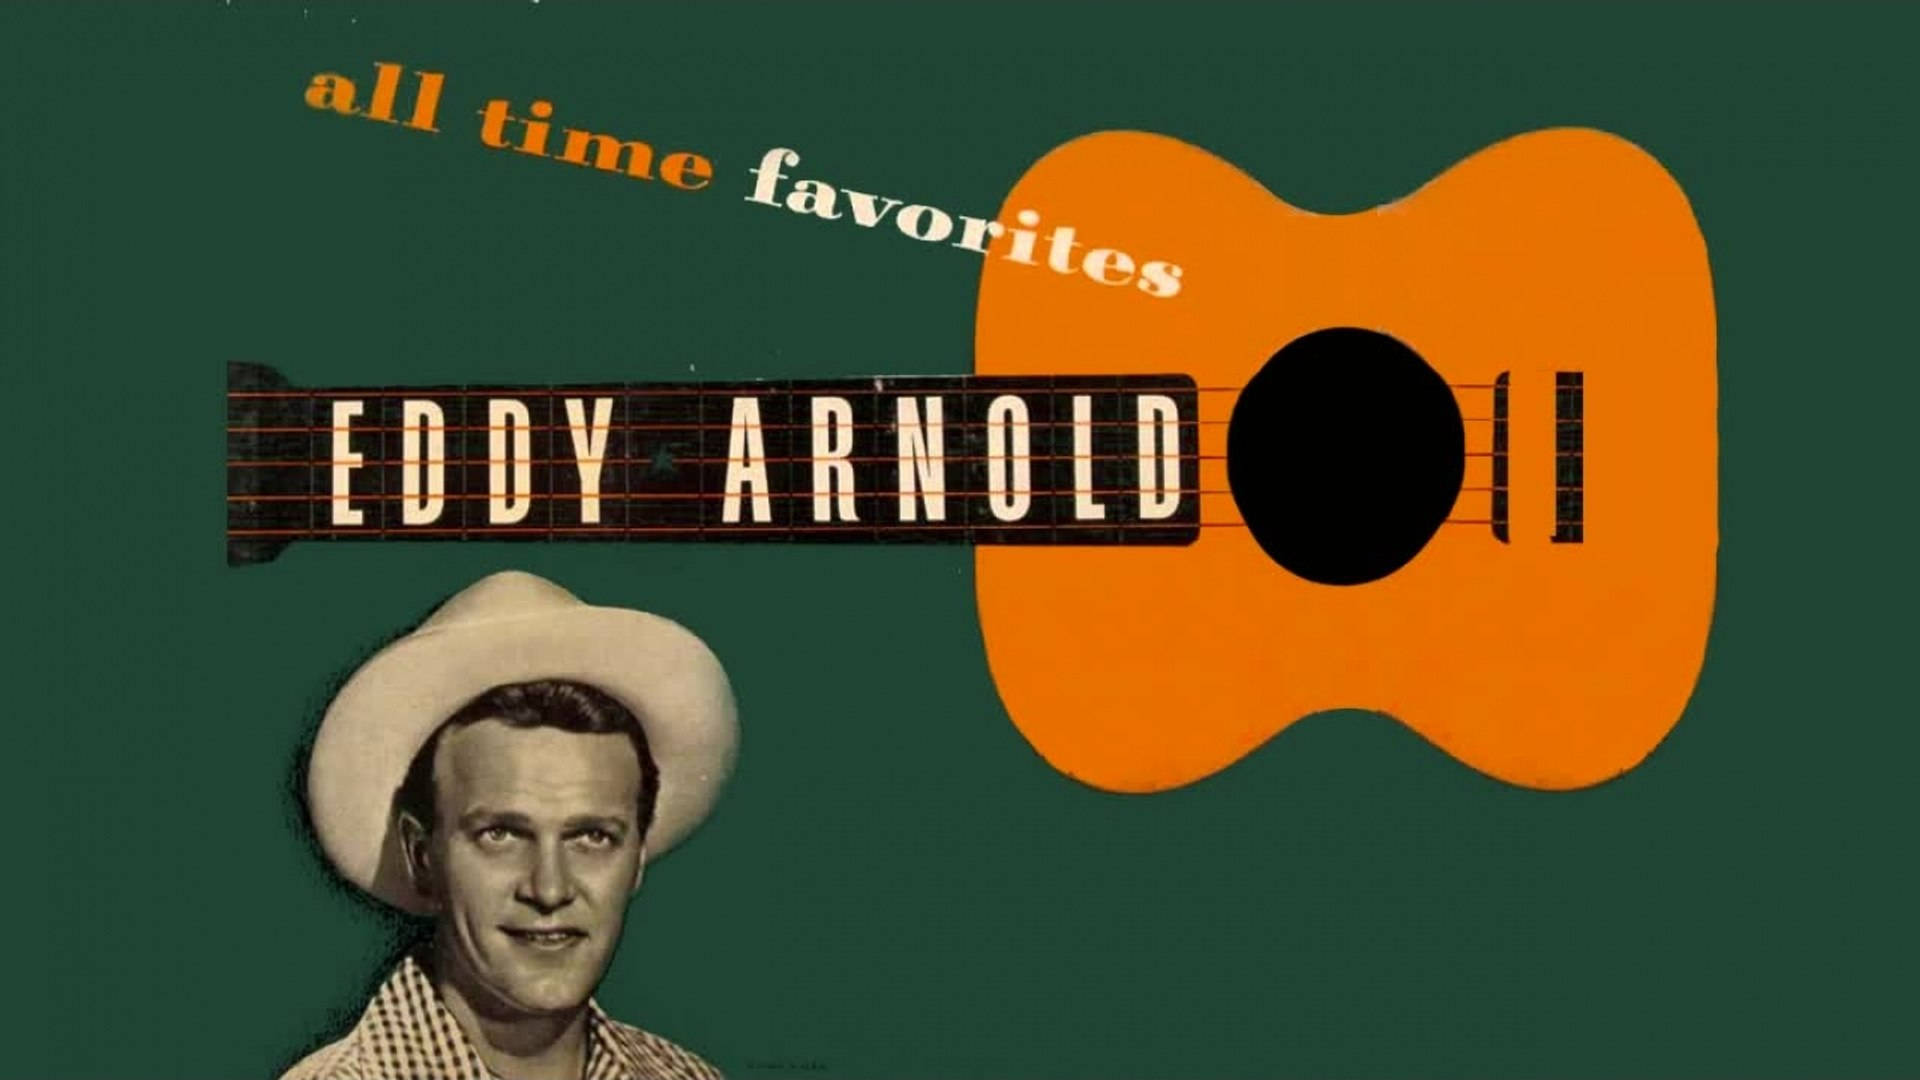 Eddy Arnold All Time Favorite Poster Wallpaper